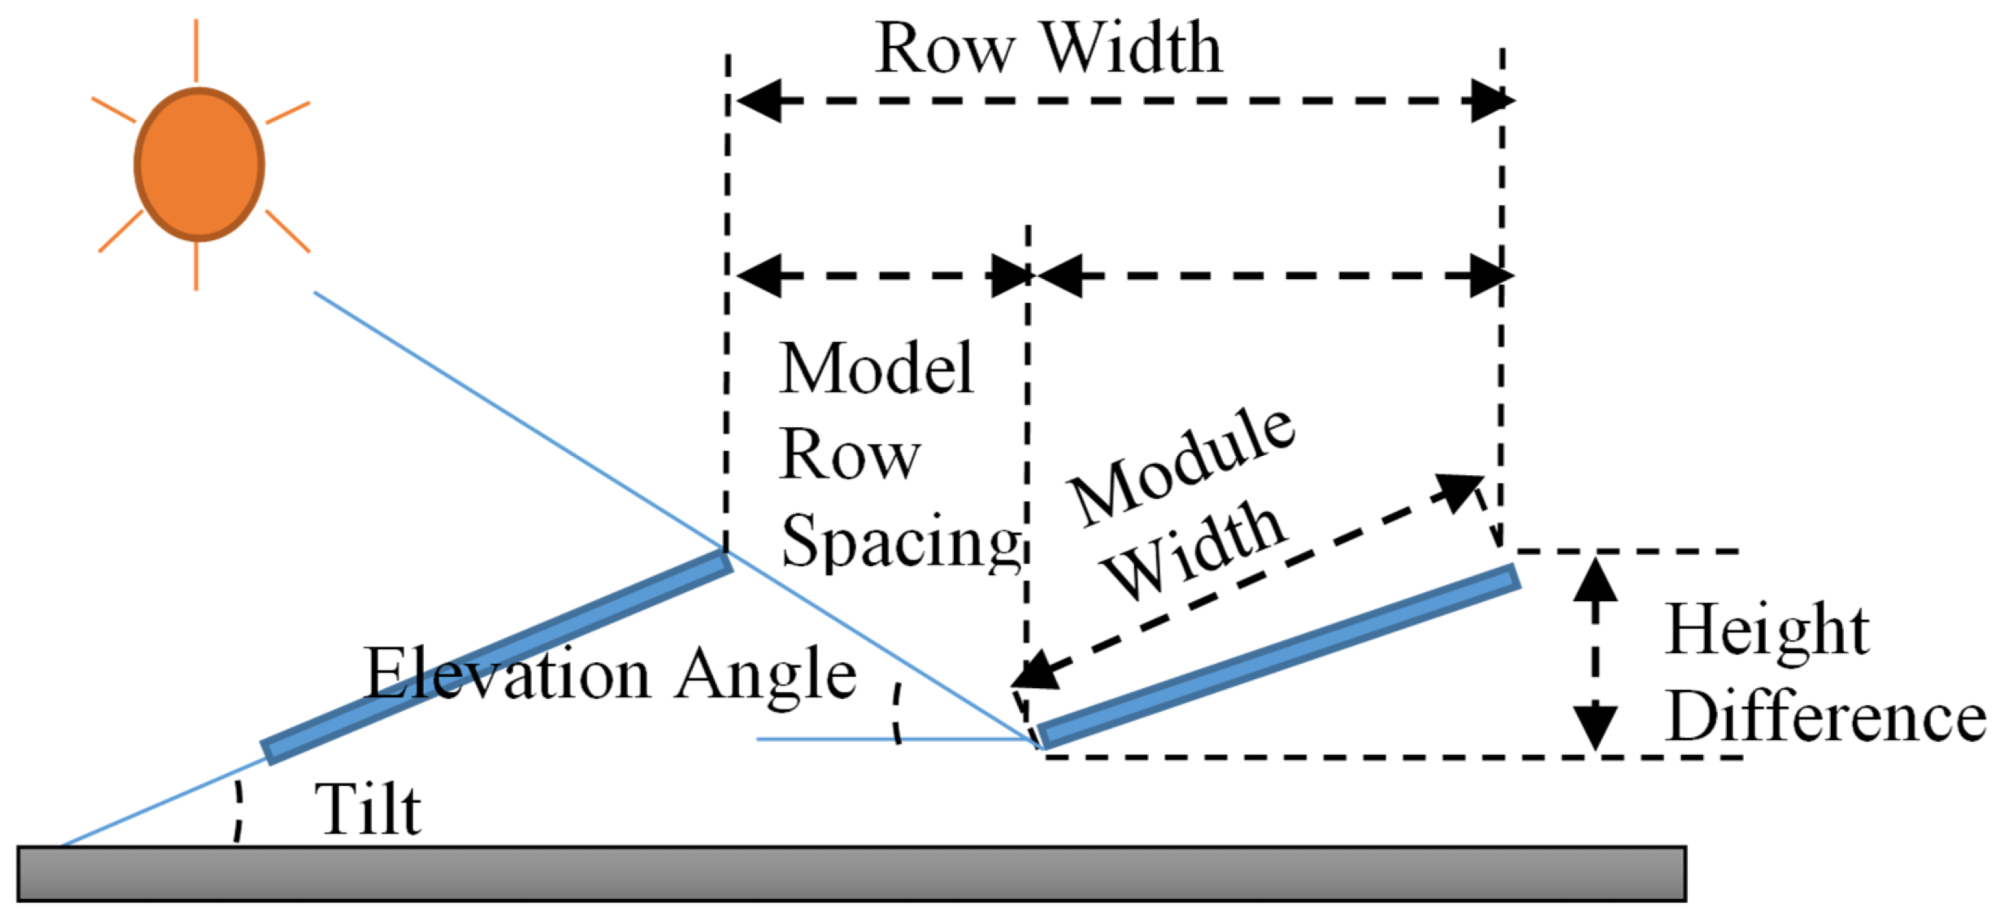 Relationship between elevation angle and spacing between rows